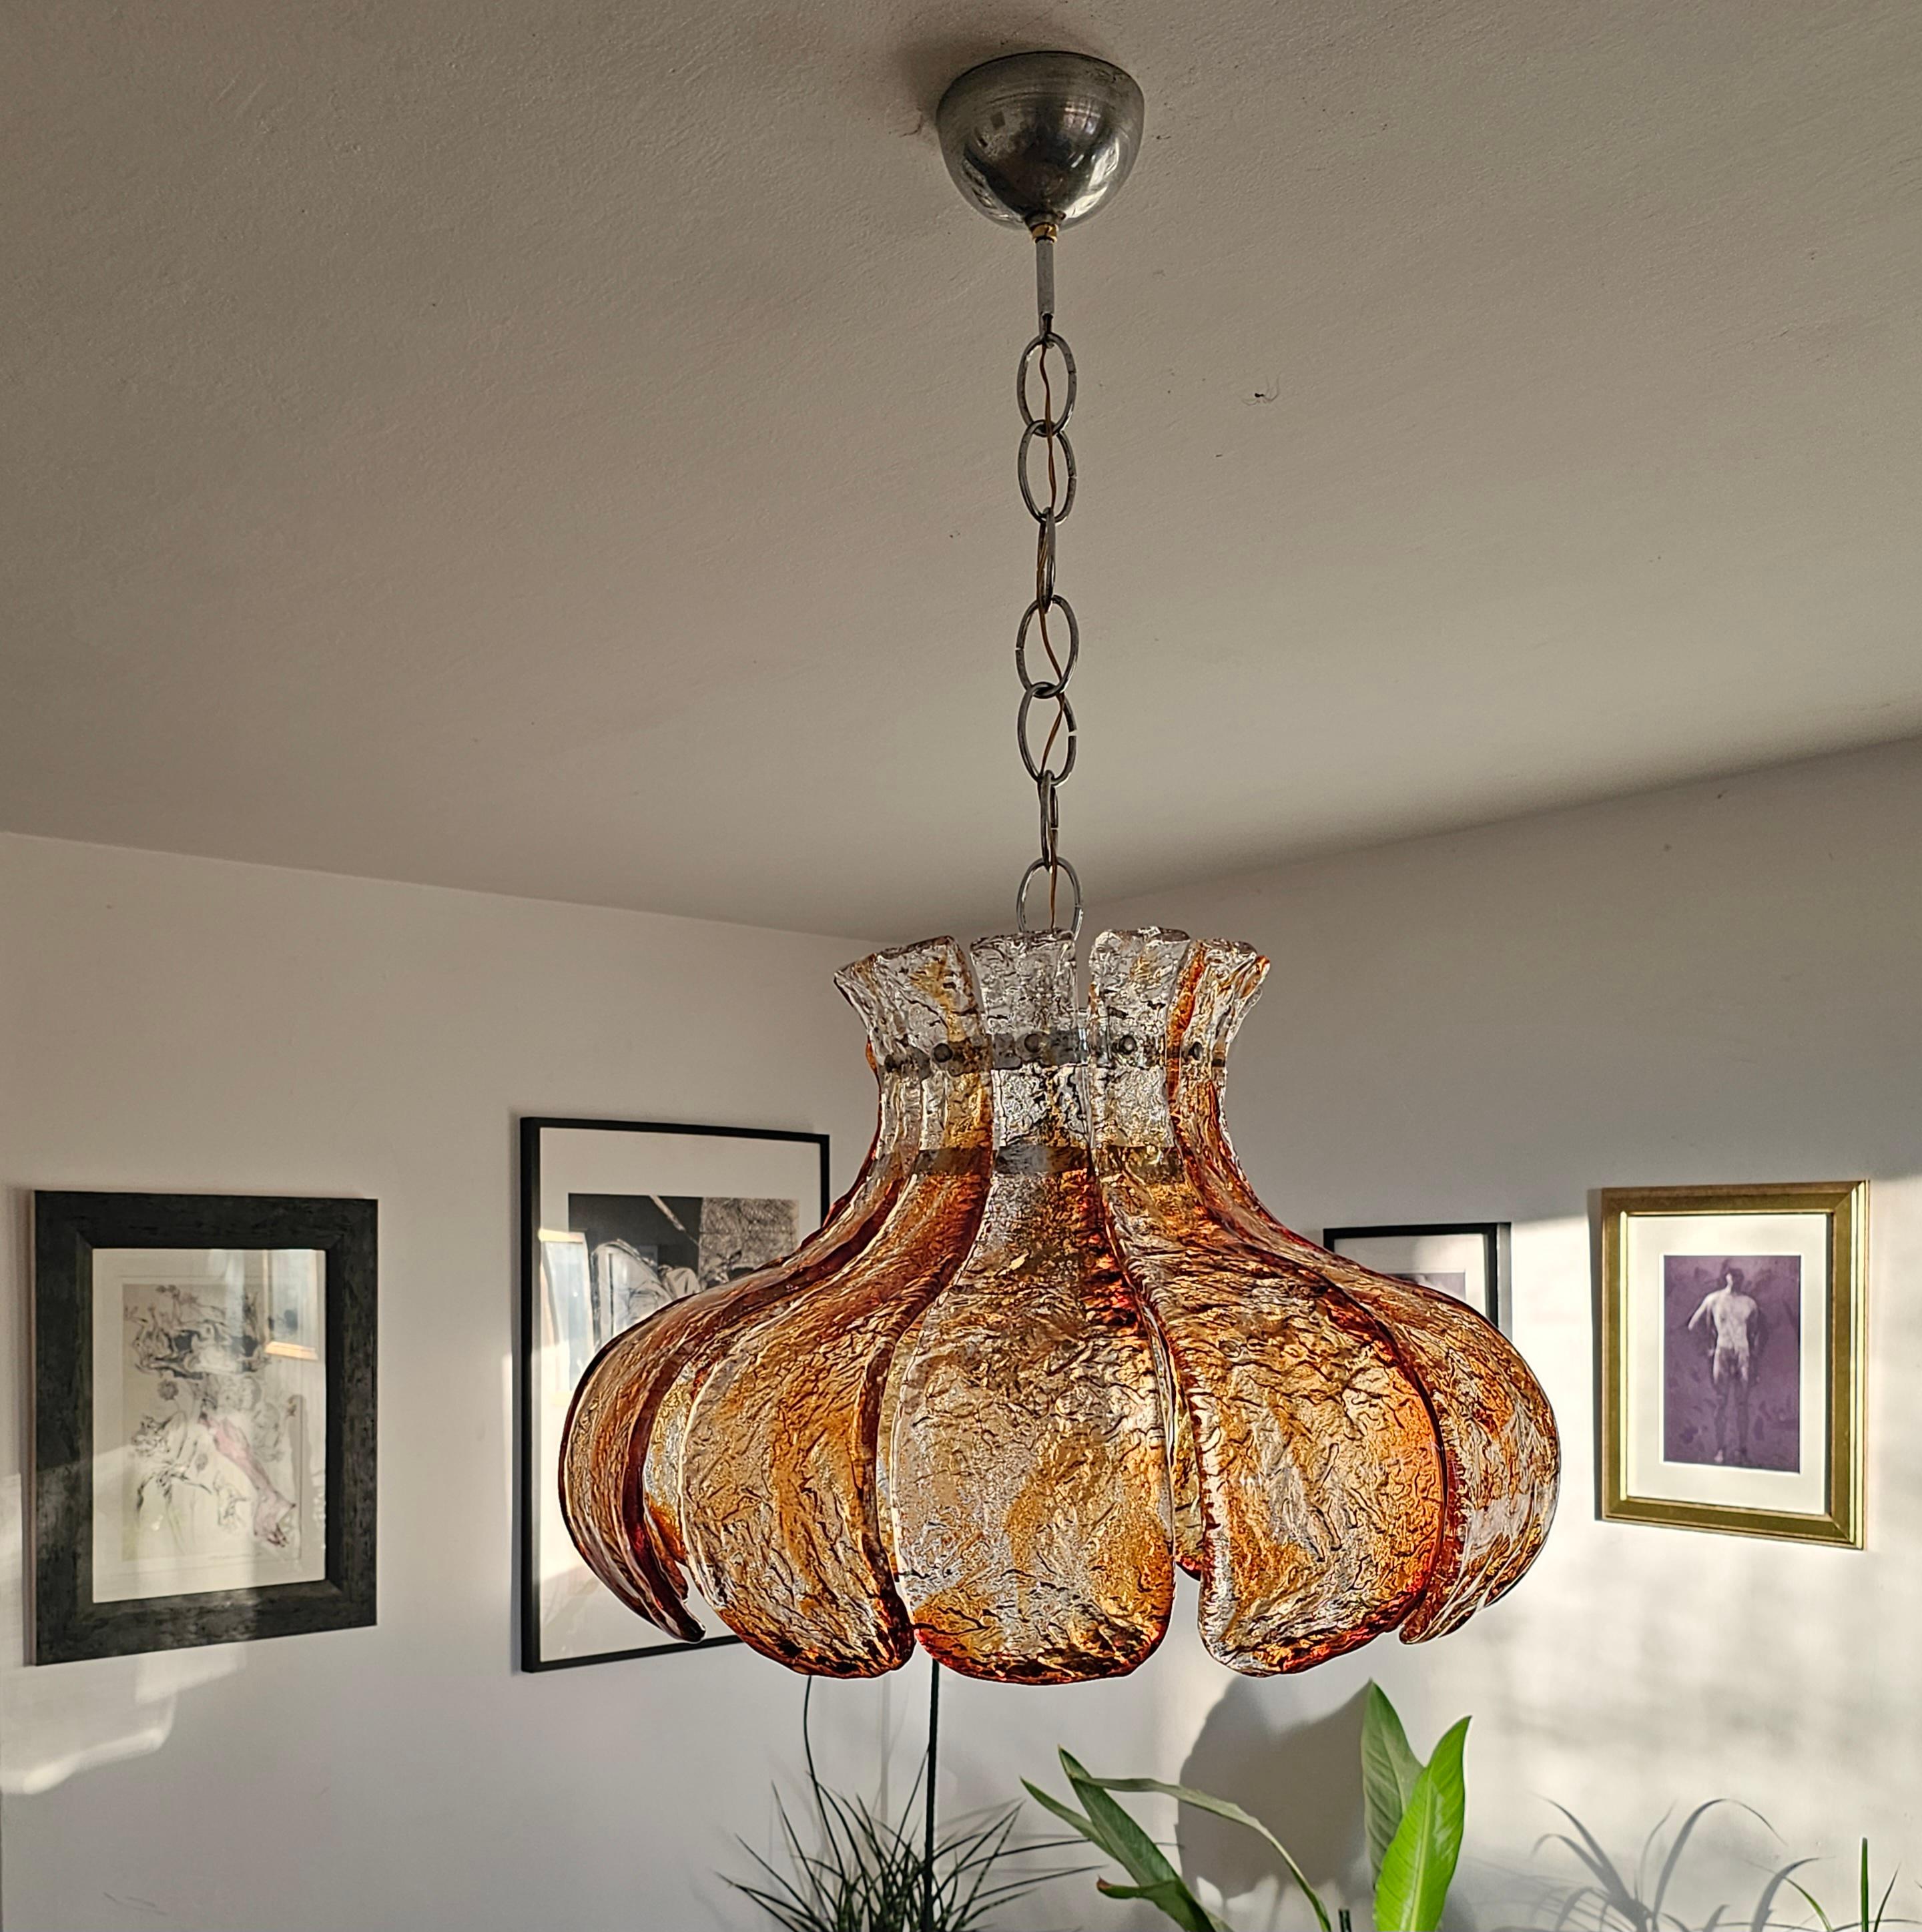 In this listing you will find a Mid Century Modern suspension light done in hand molded and fused dark amber and clear Murano glass petals of Murano glass. This famous model made by the renowned designer Carlo Nason for the MAZZEGA glassworks. Made